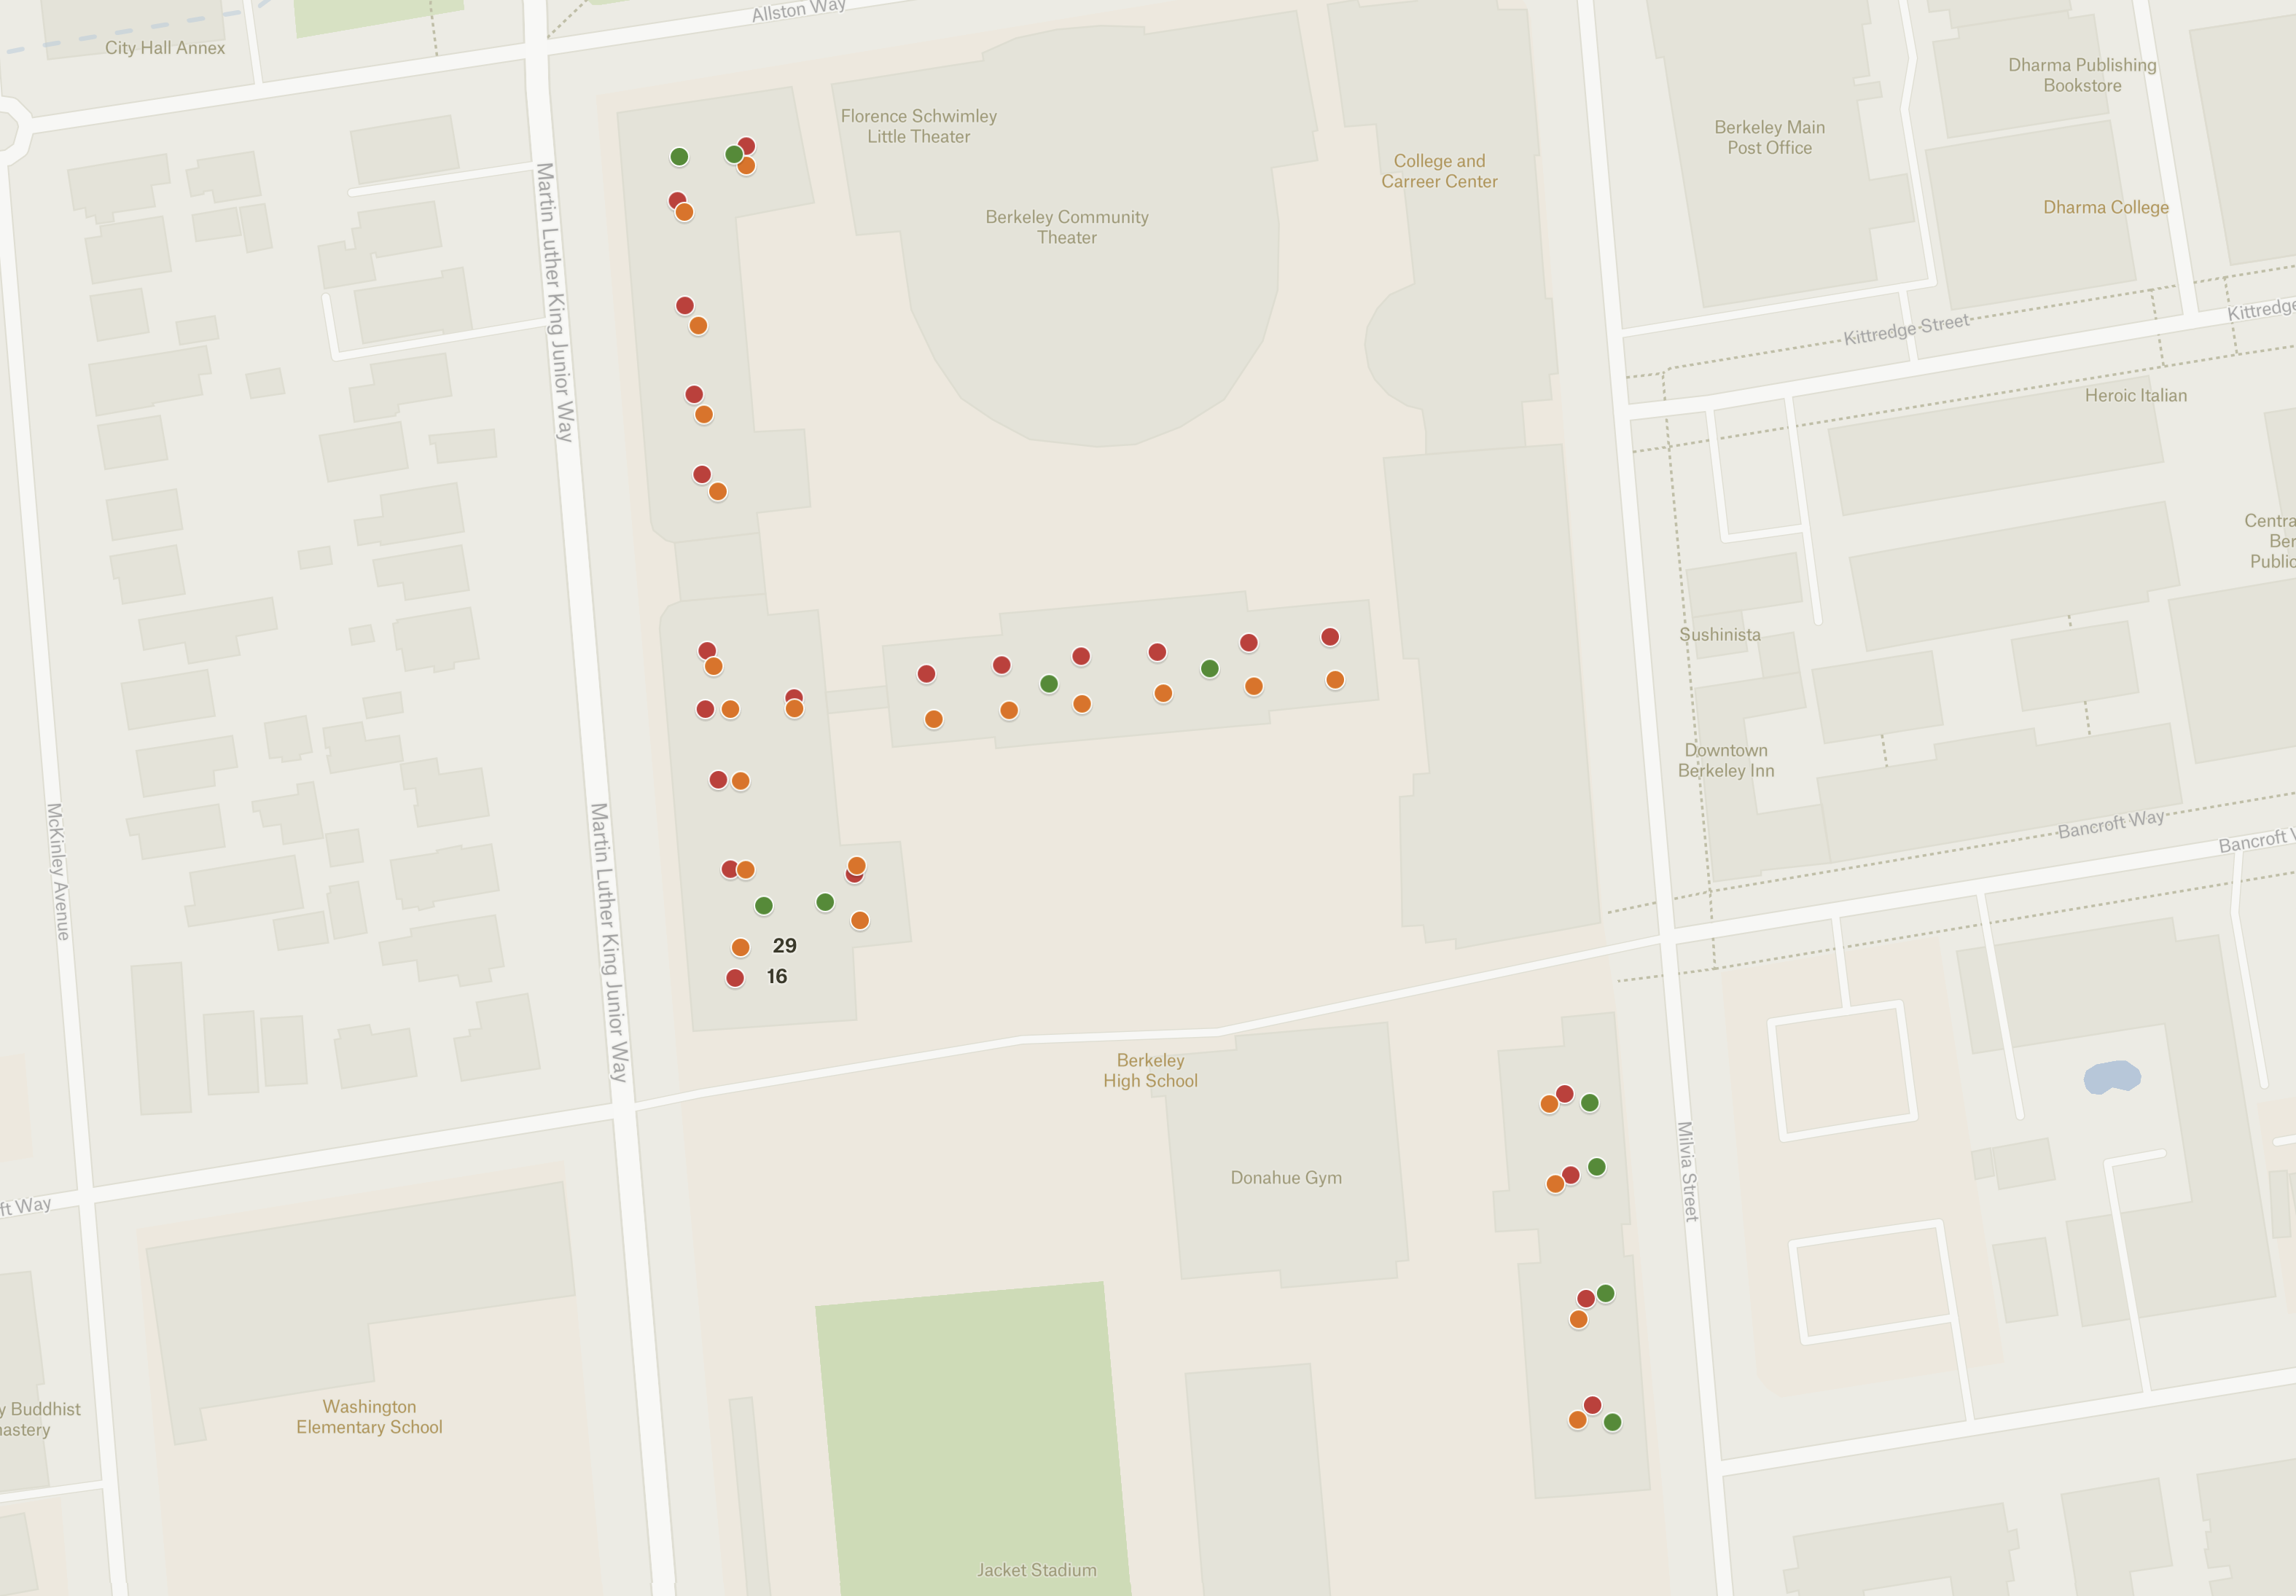 A map of the school with the locations of the posters marked.